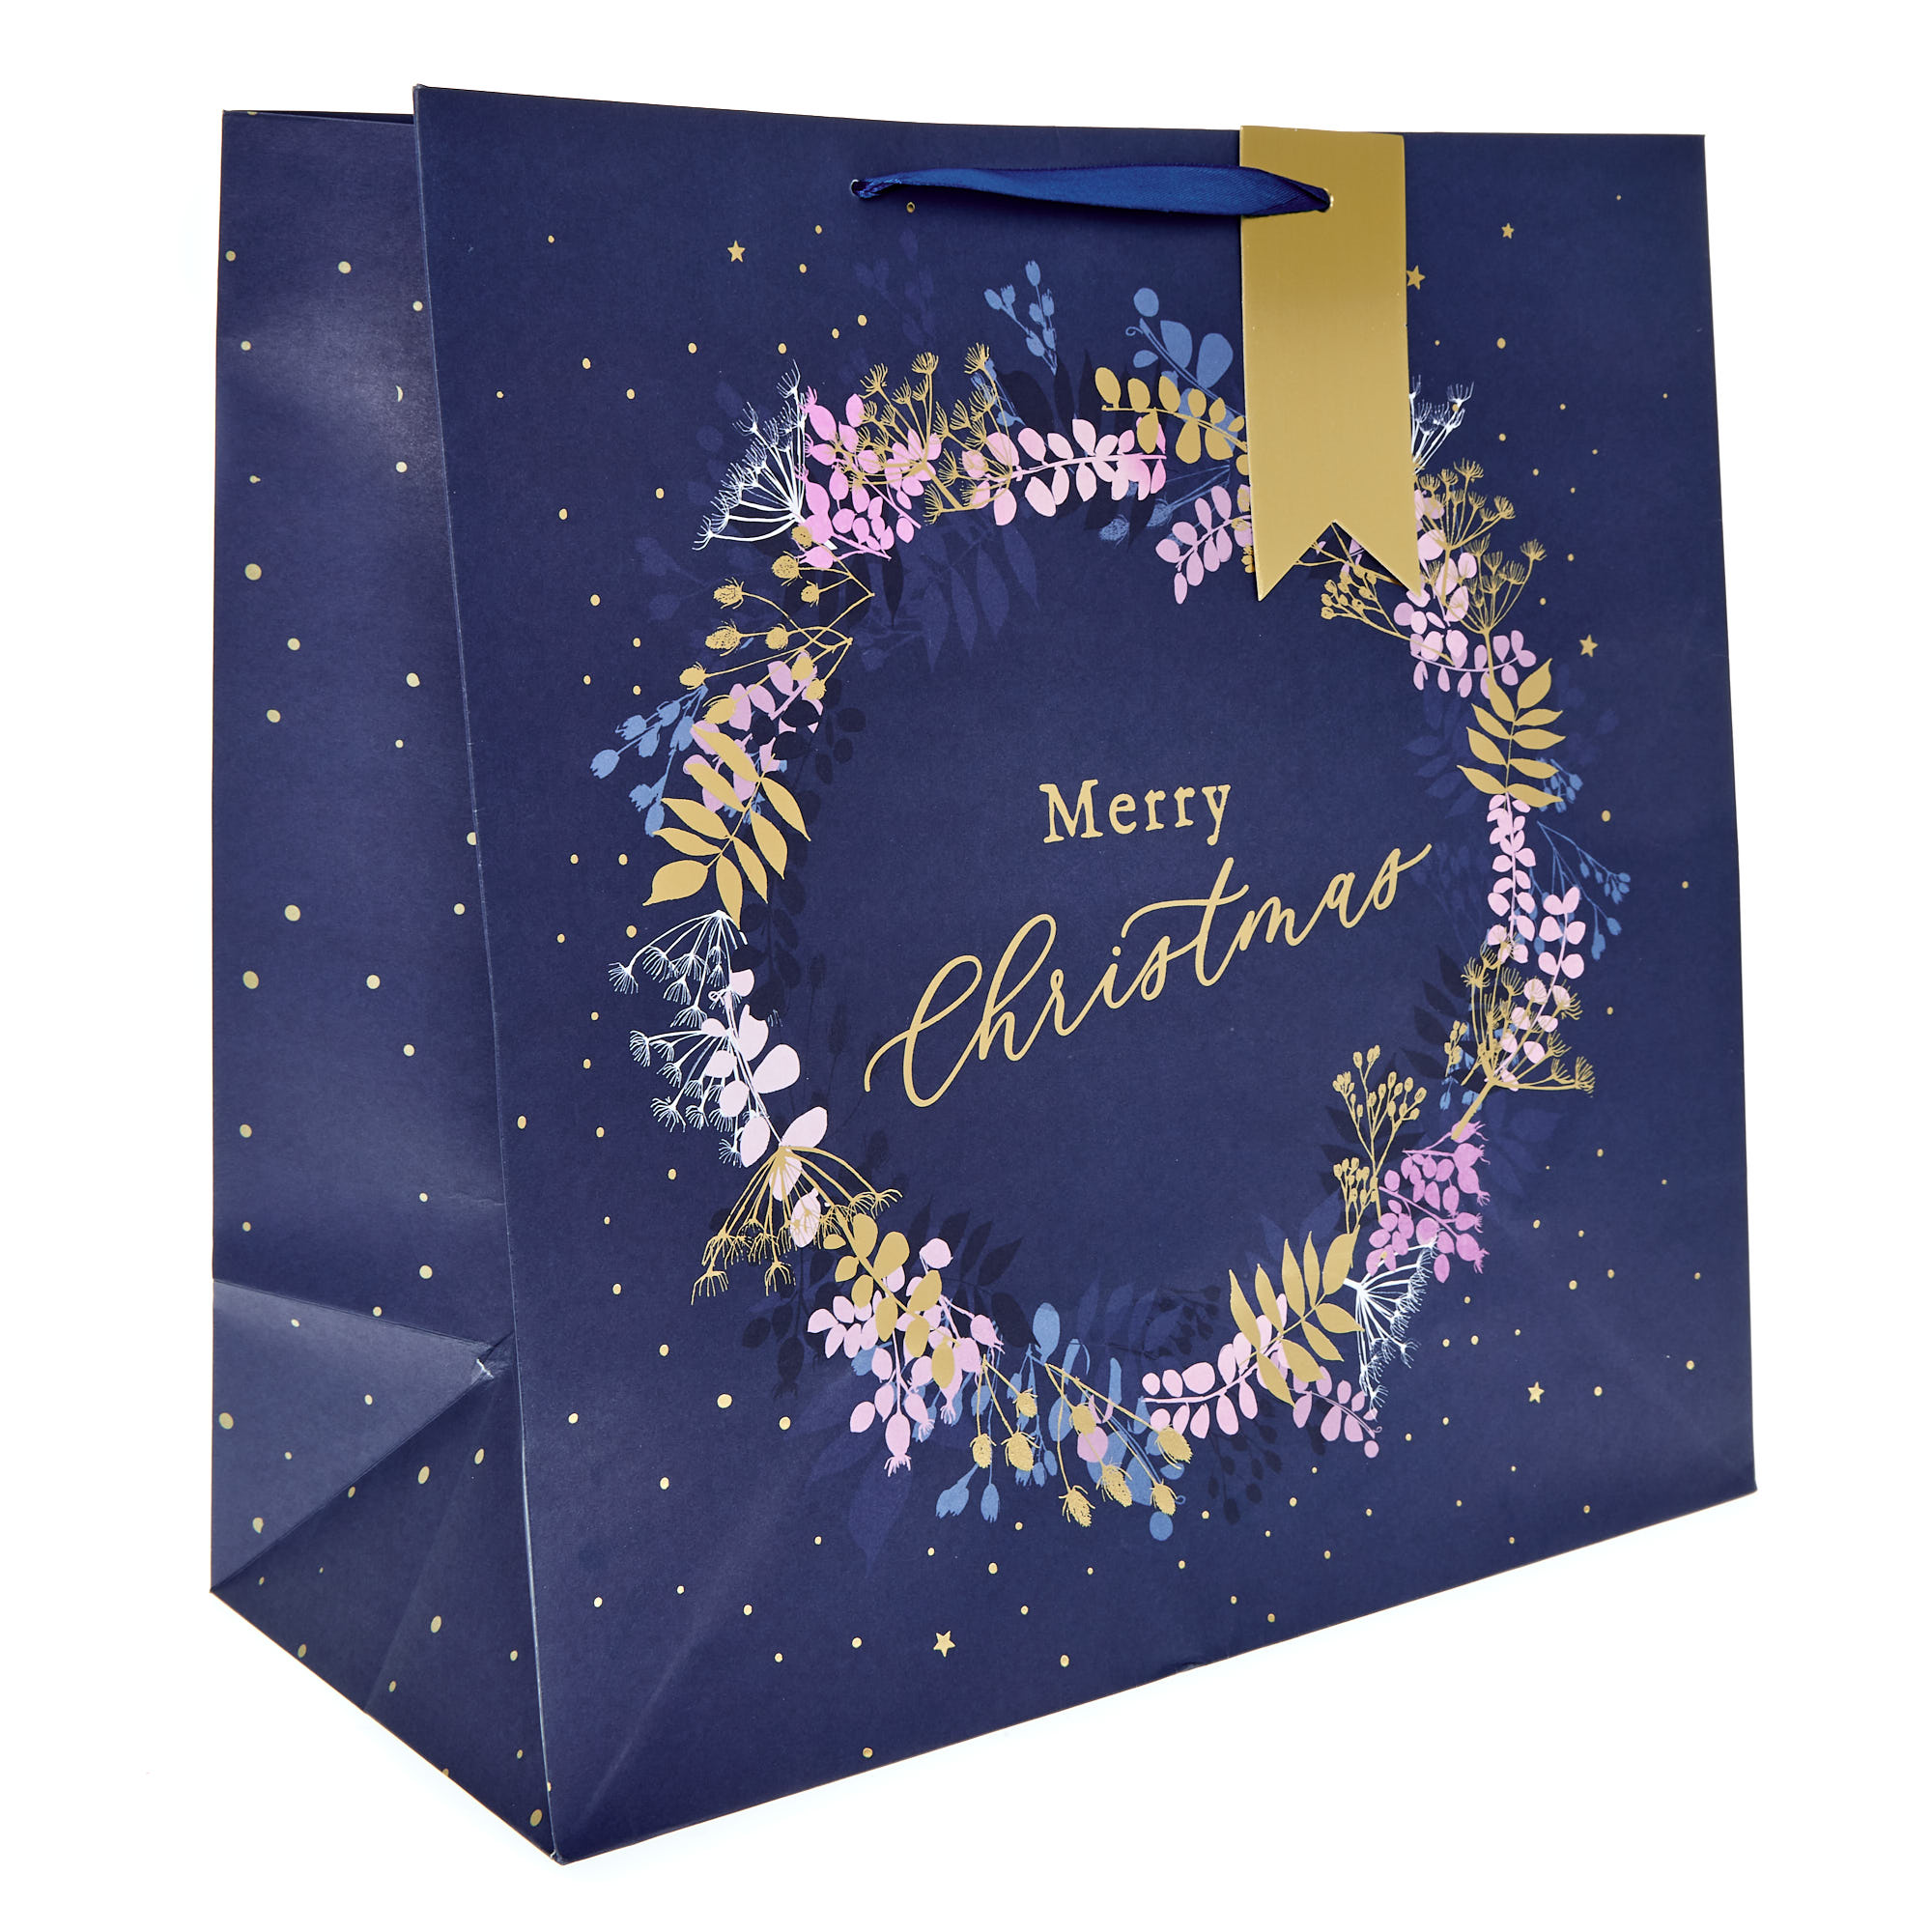 Giant Square Merry Christmas Wreath Gift Bag